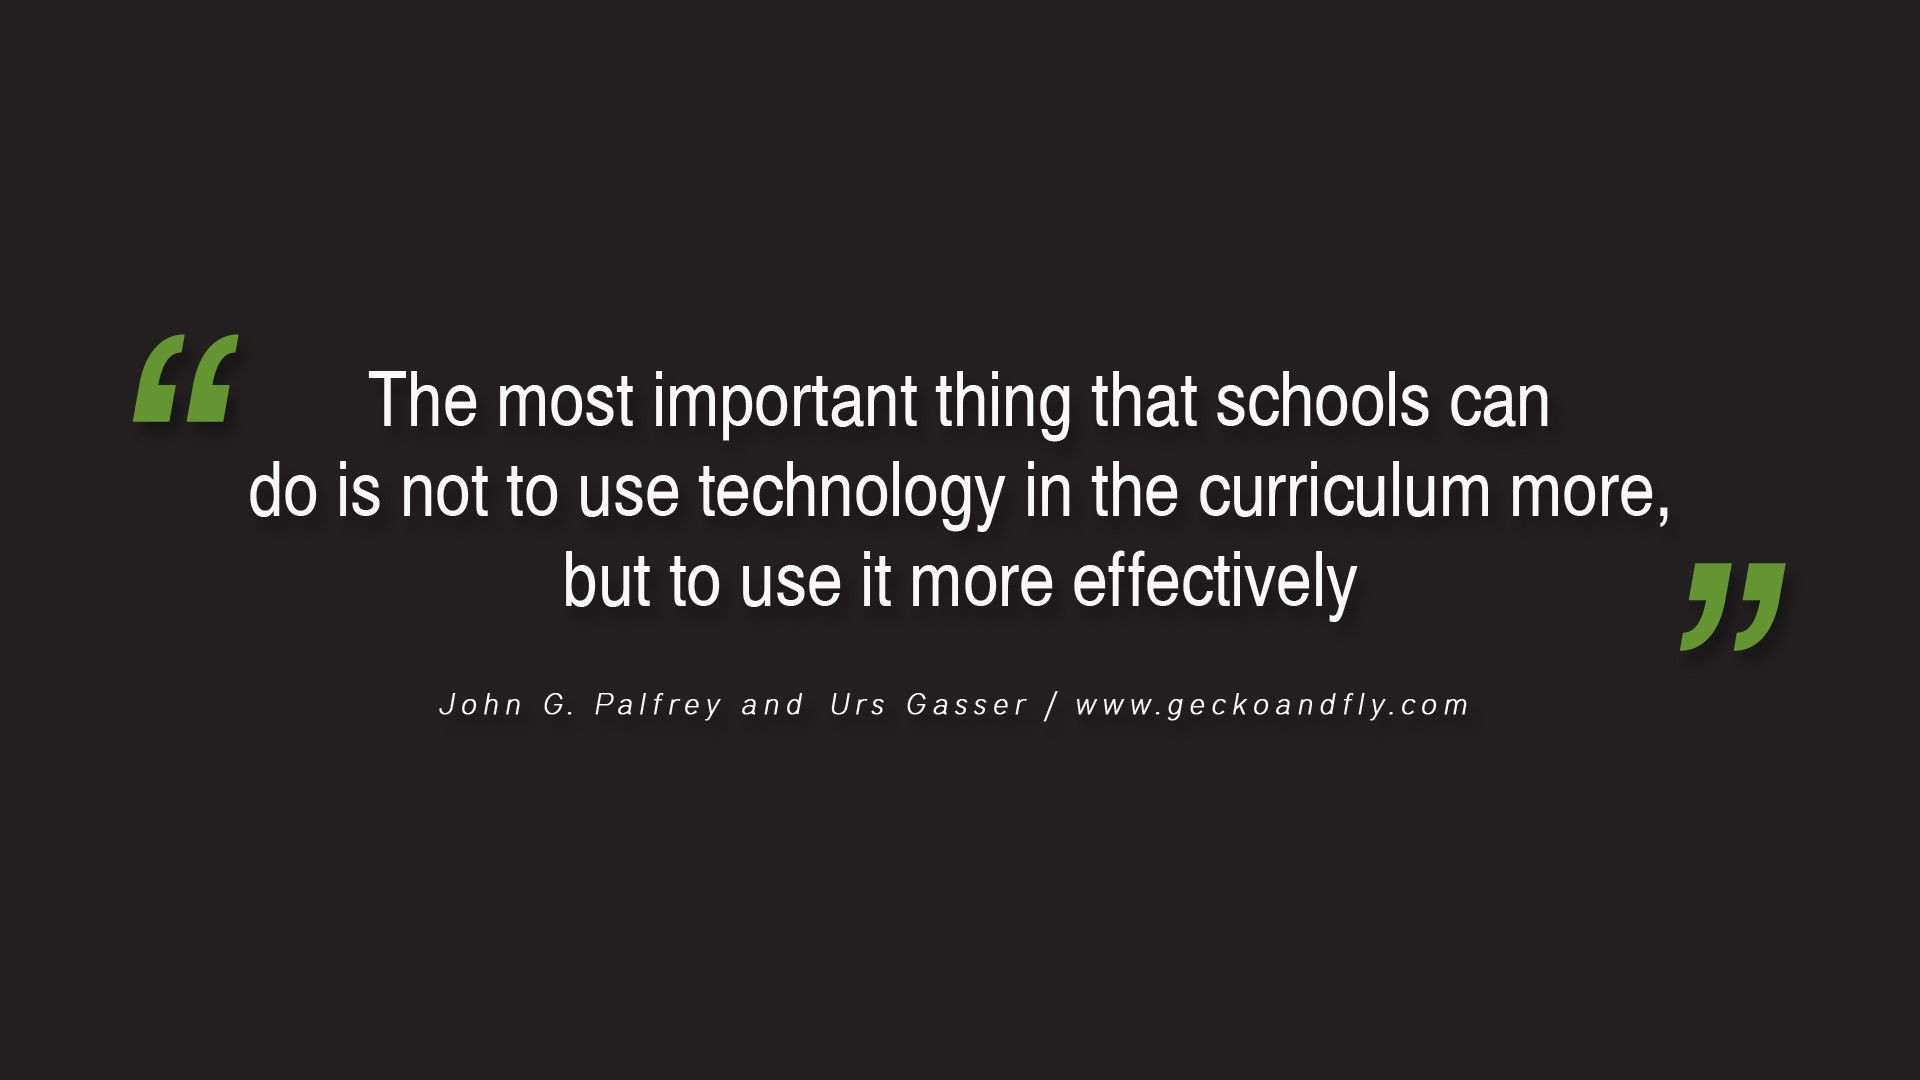 Quote About Technology In Education
 The most important thing that schools can do is not to use